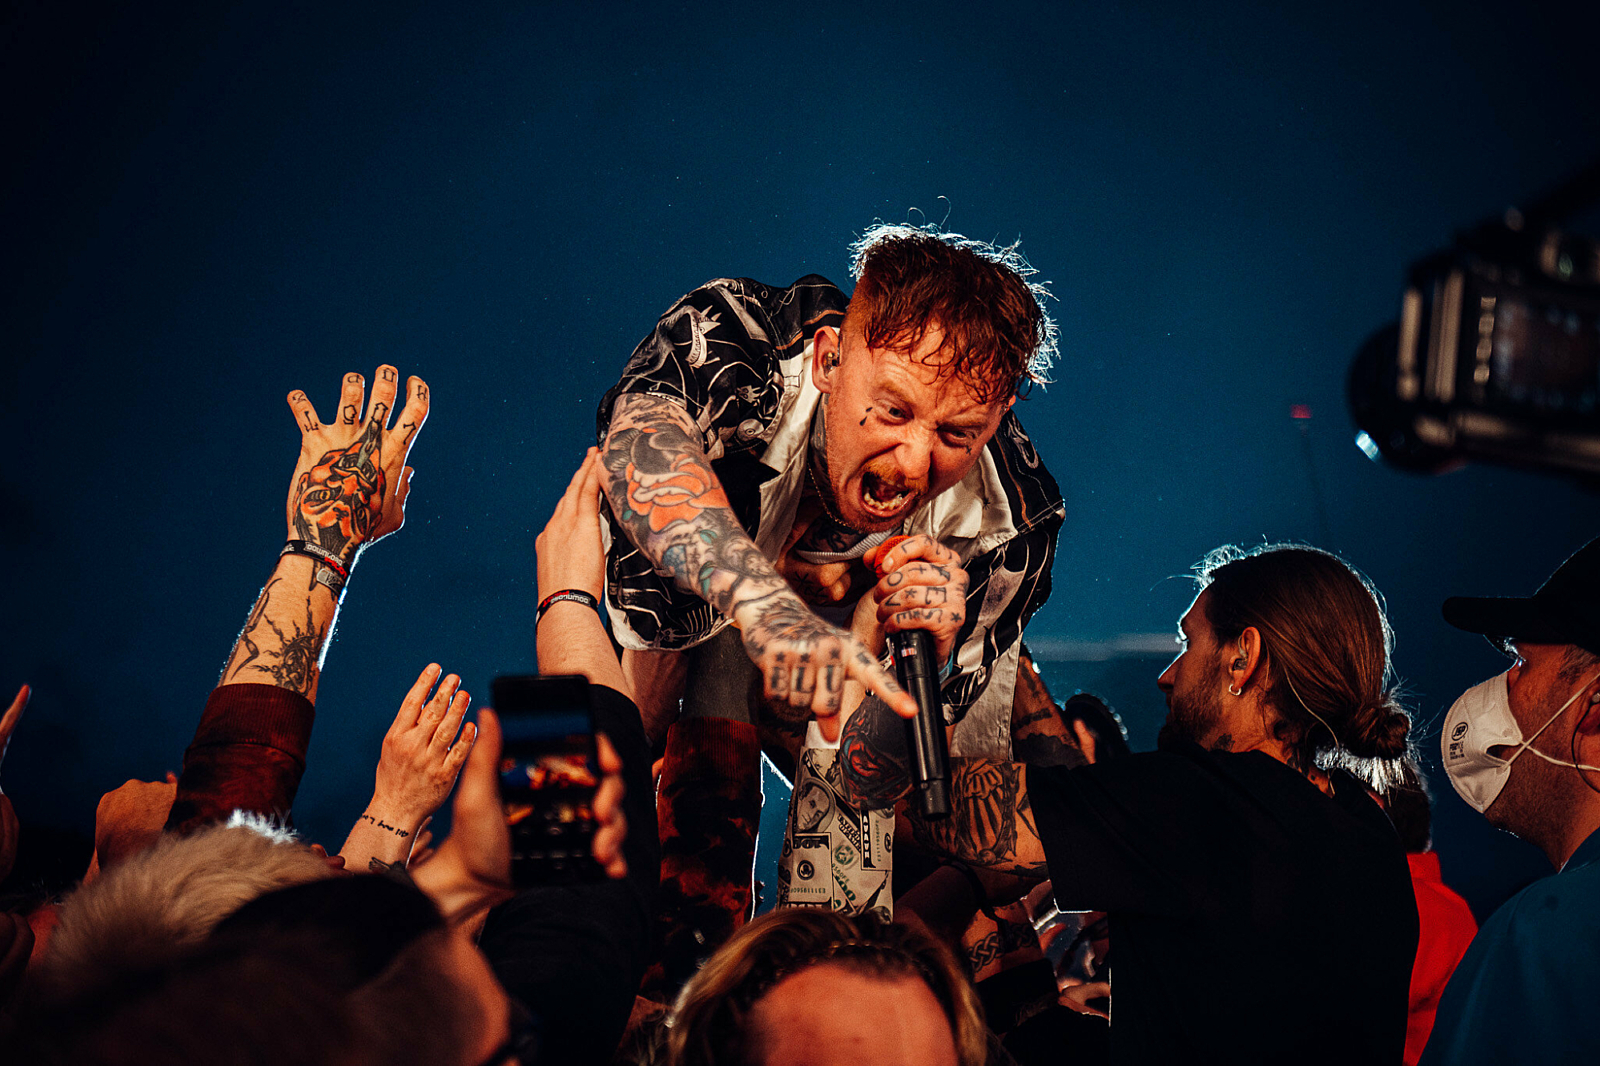 Frank Carter & The Rattlesnakes, 100 gecs, WILLOW and more join Reading & Leeds lineup